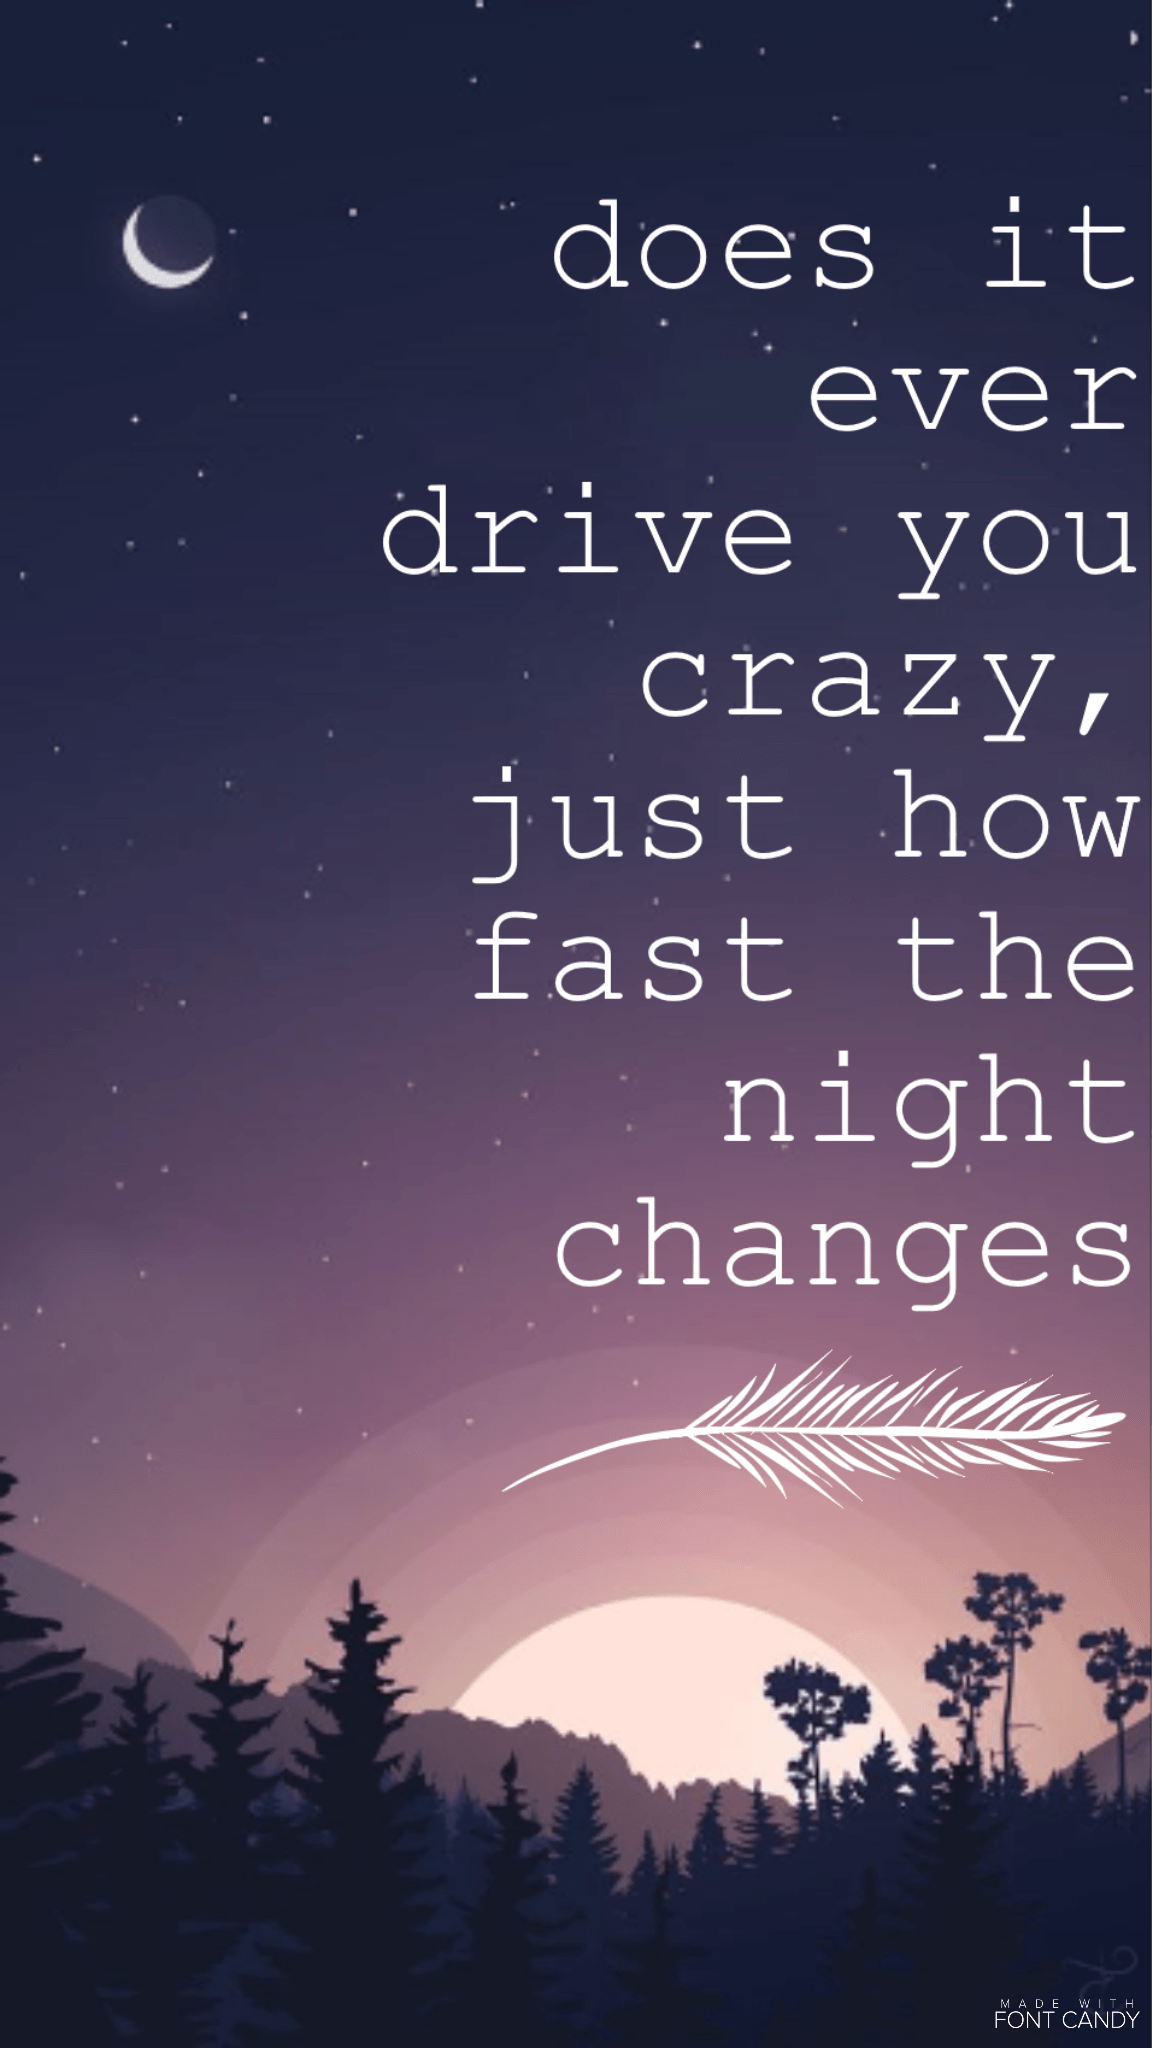 night changes #onedirection. One direction lyrics in 2019